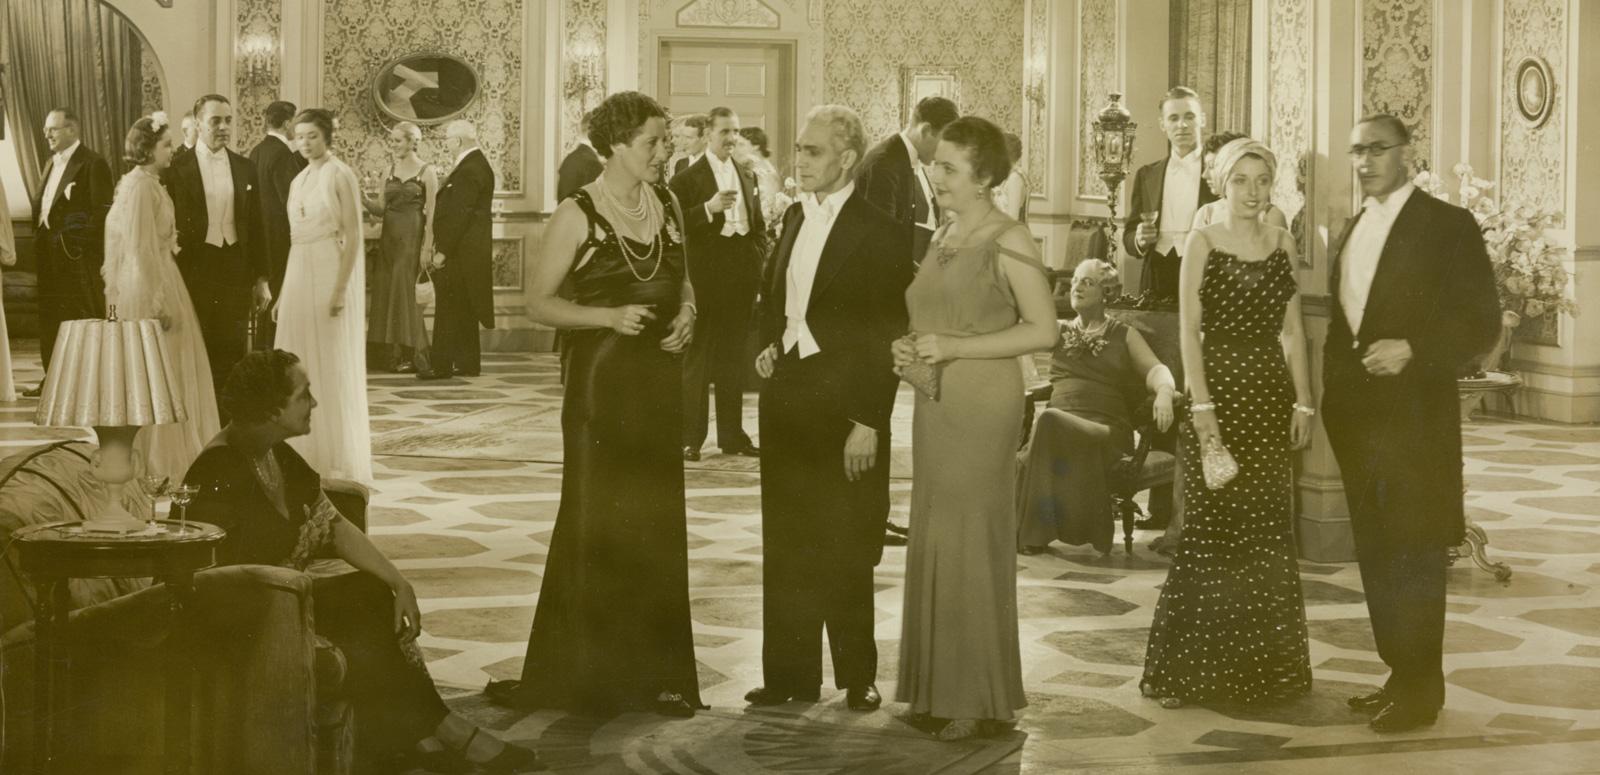 A large ballroom full of people in elegant clothing.